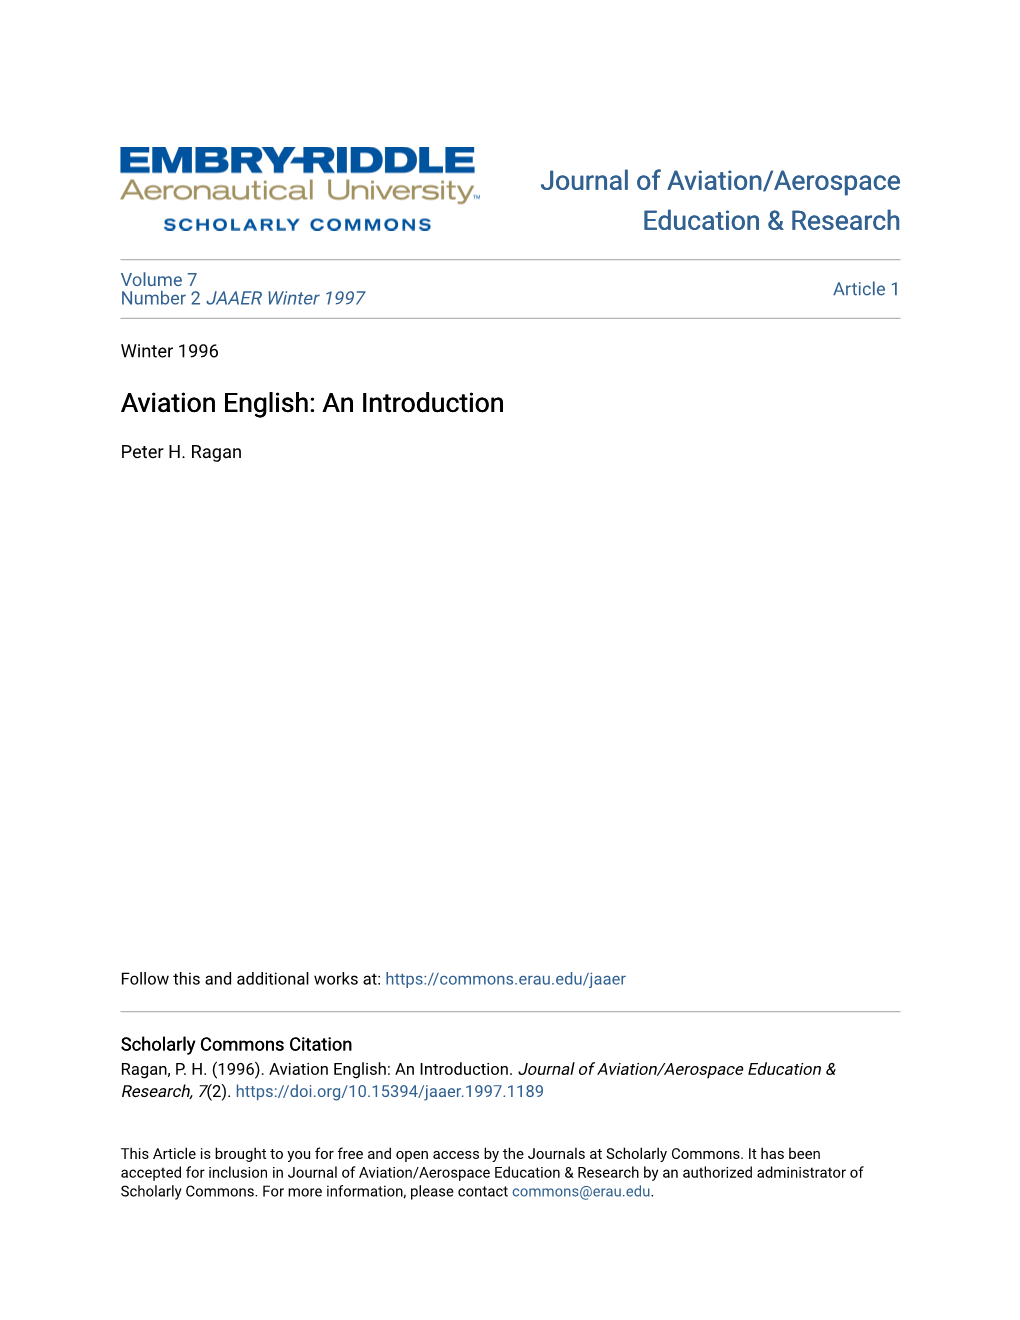 Aviation English: an Introduction